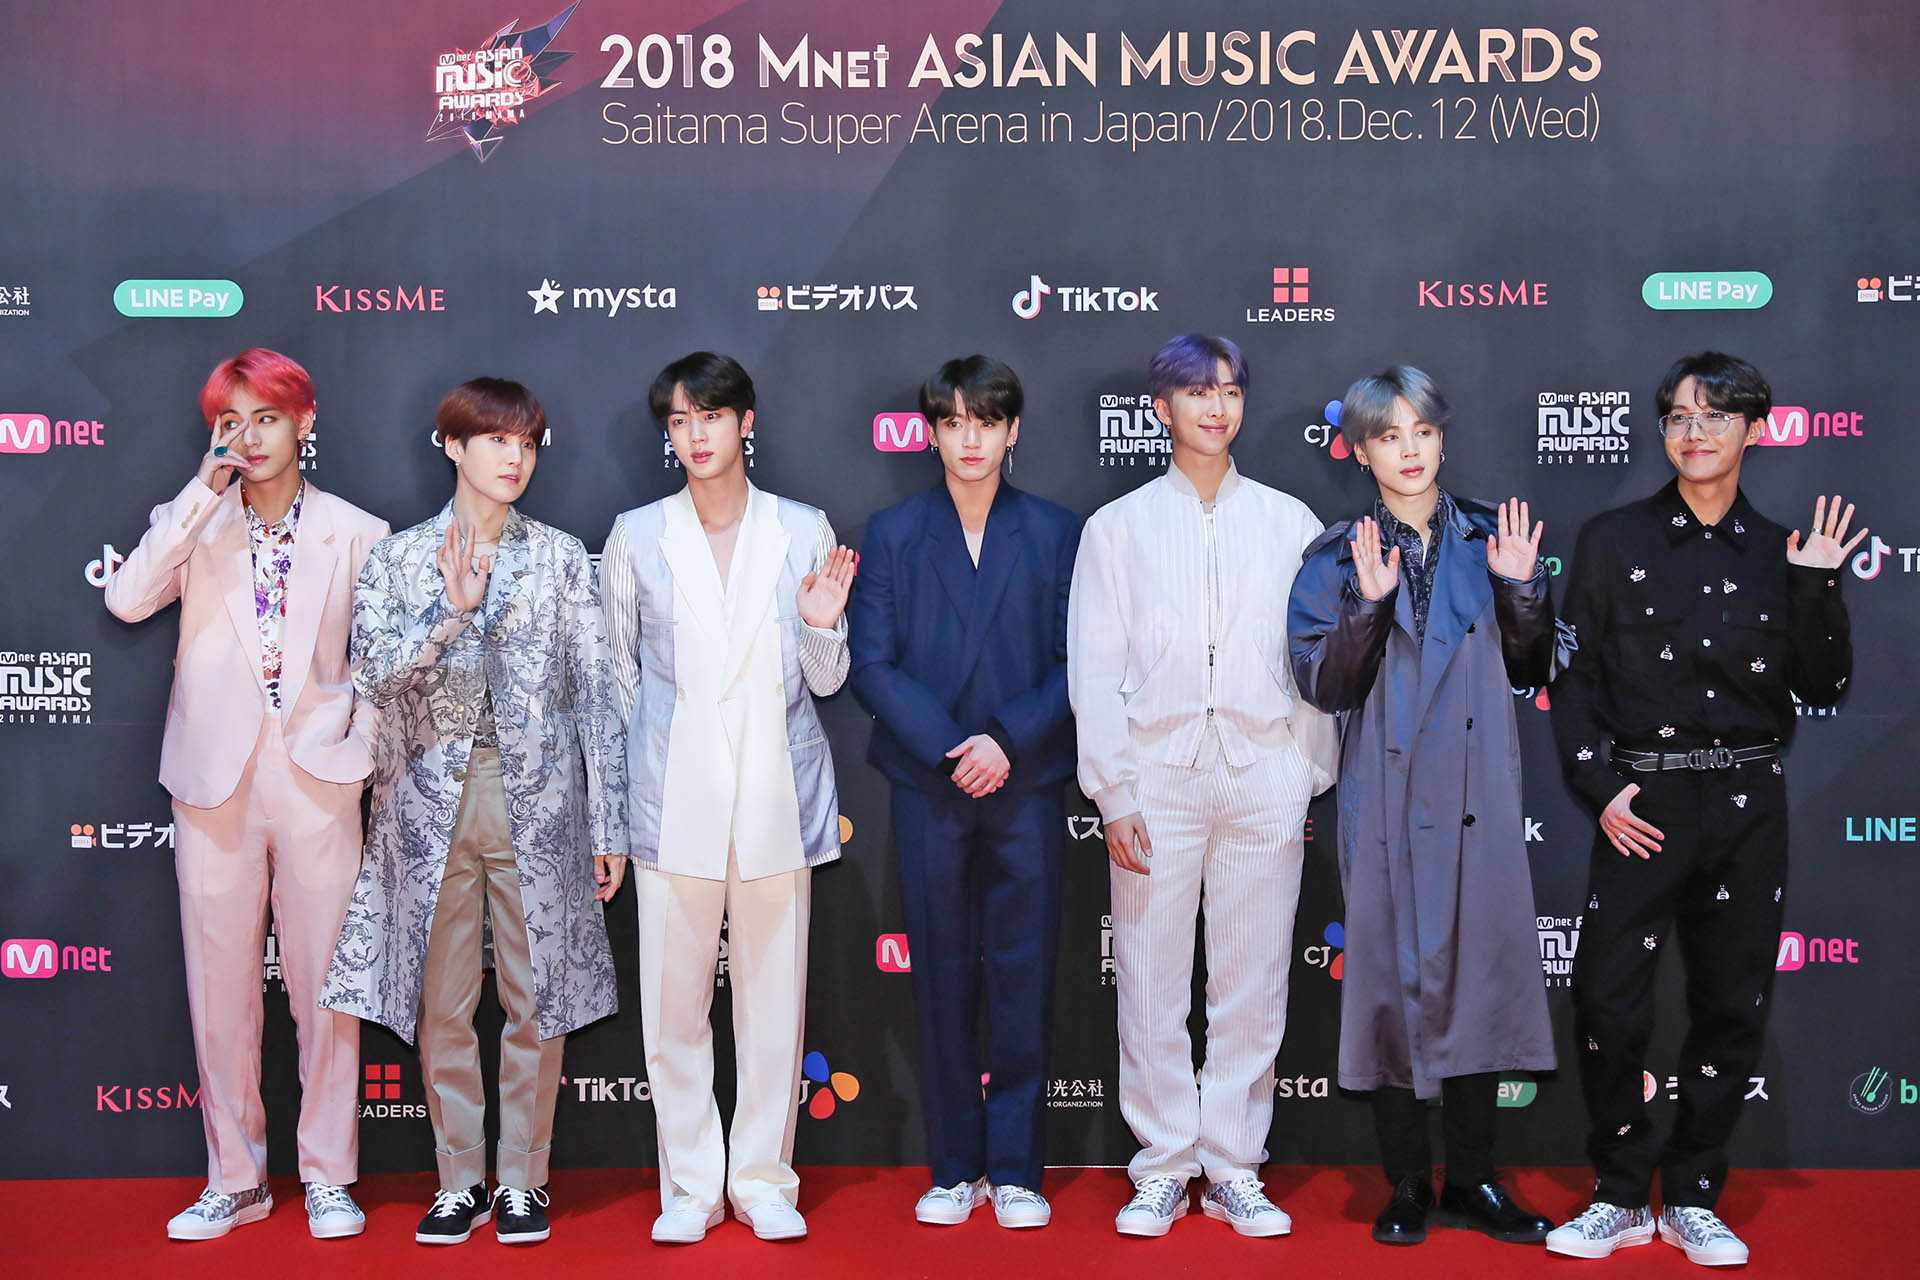 [Video] BTS has won "Daesang" the 2018 MAMA award for the third year in a row